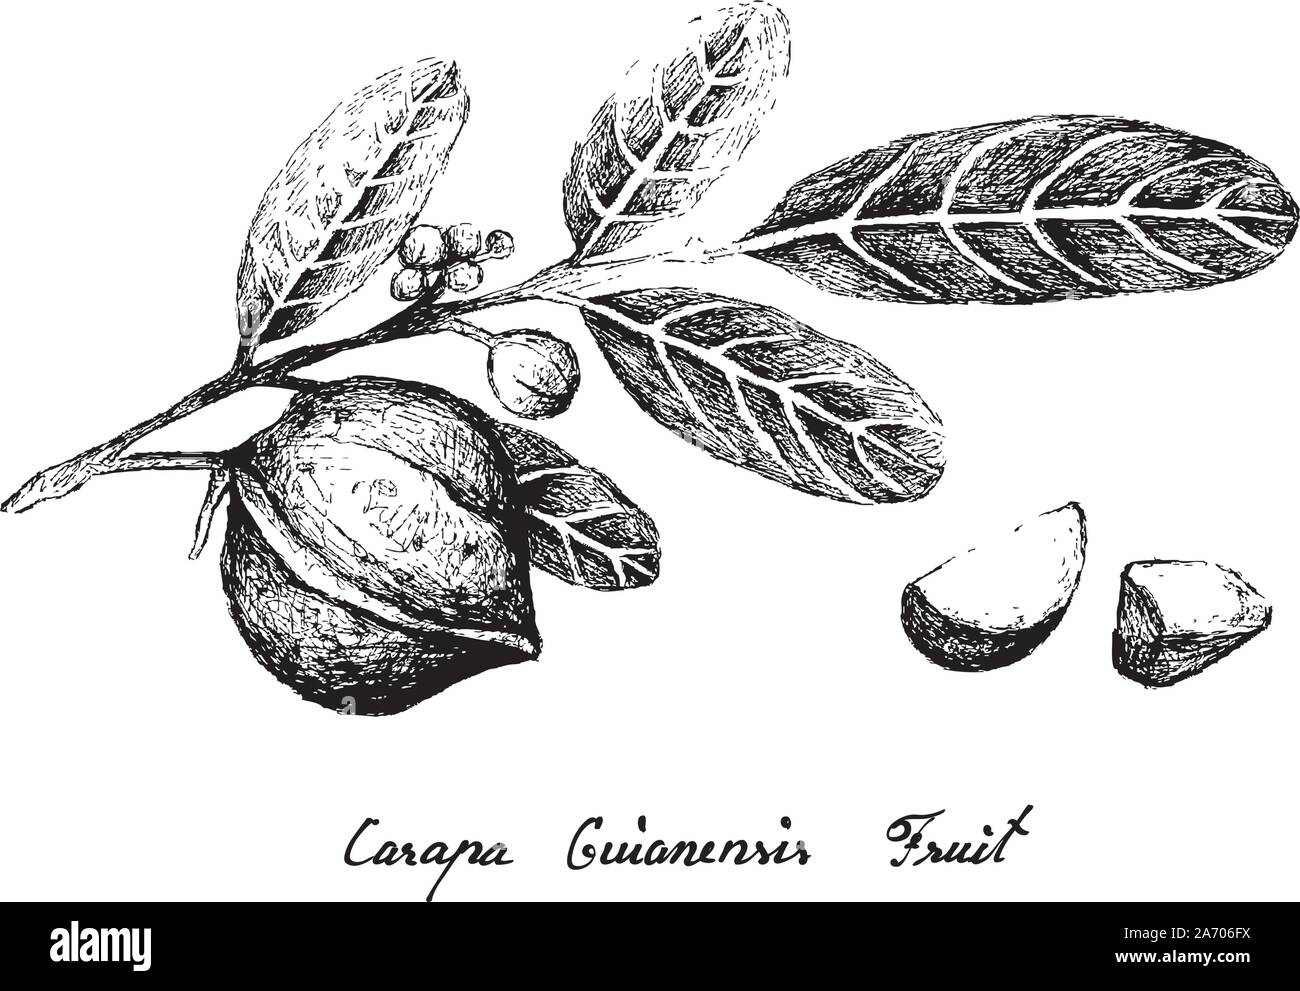 Illustration Hand Drawn Sketch of Carapa Guianensis, Andiroba or Crabwood Fruits on A Tree, Good Source of Dietary Fiber, Vitamins and Minerals. Stock Vector